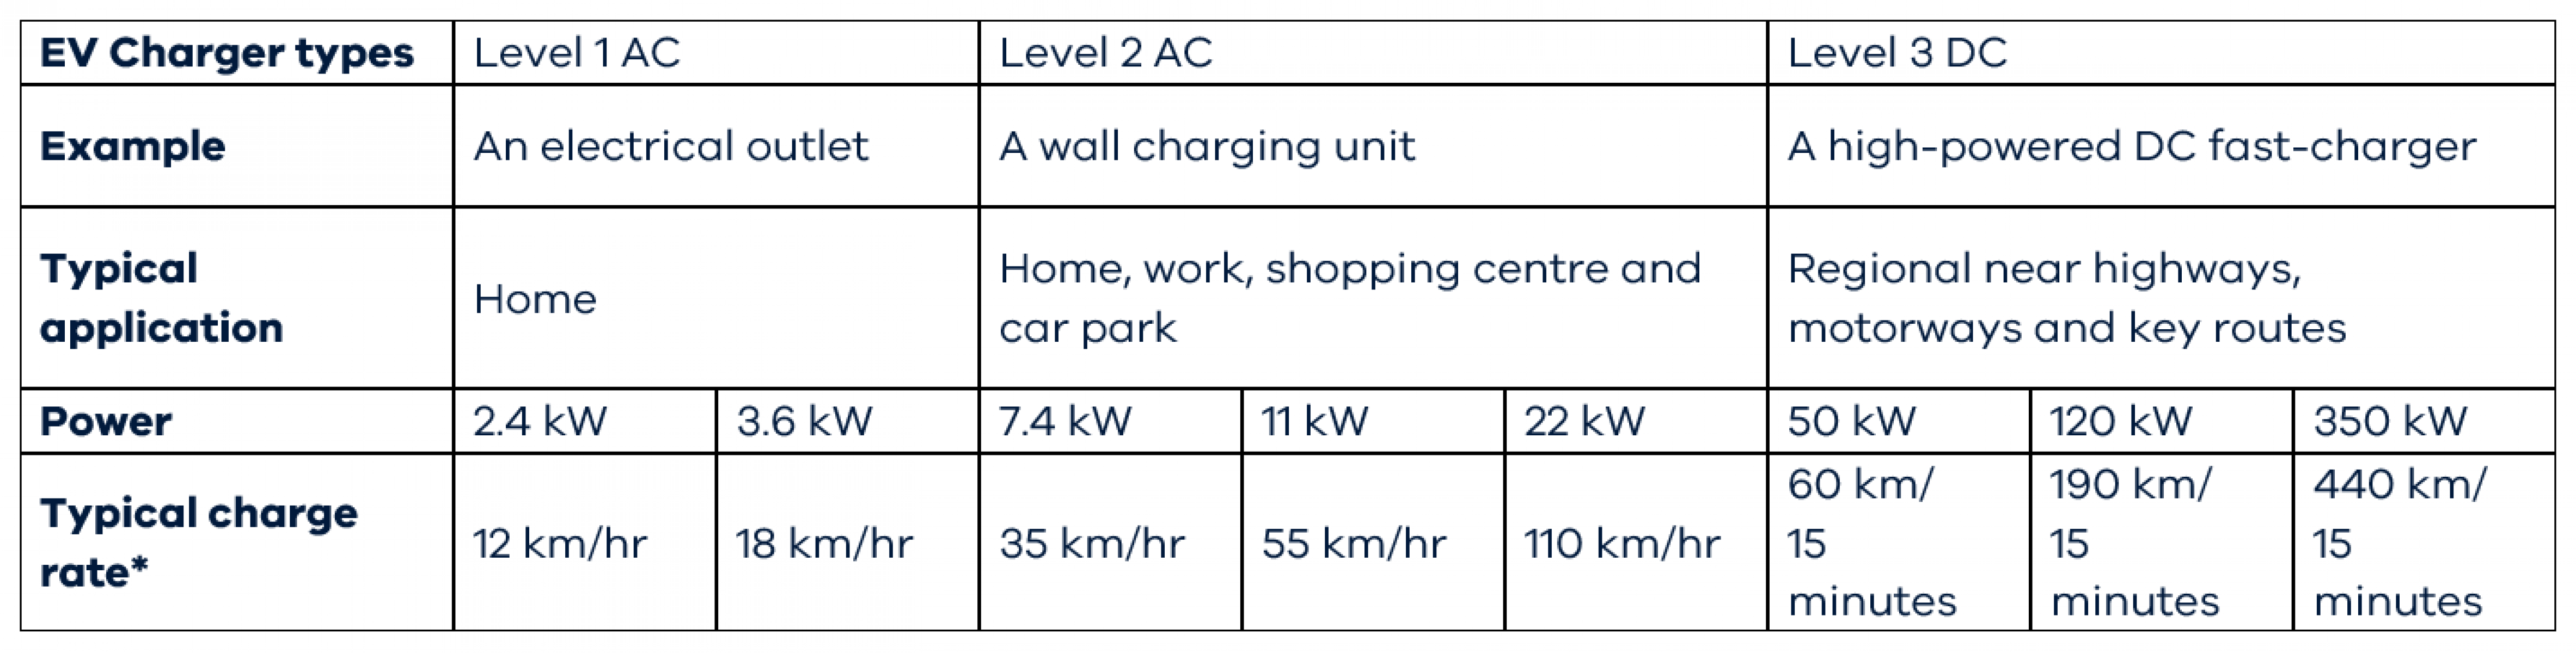 EV Charger types 	Level 1 AC 		Level 2 AC 			Level 3 DC 		 Example 	An electrical outlet 		A wall charging unit 			A high-powered DC fast-charger 		 Typical application 	Home 		Home, work, shopping centre and car park 			Regional near highways; motorways and key routes 		 Power 	2.4 kW 	3.6 kW 	7.4 kW 	11 kW 	22 kW 	50 kW 	120 kW 	350 kW  Typical charge rate* 	12 km/hr 	18 km/hr 	35 km/hr 	55 km/hr 	110 km/hr 	